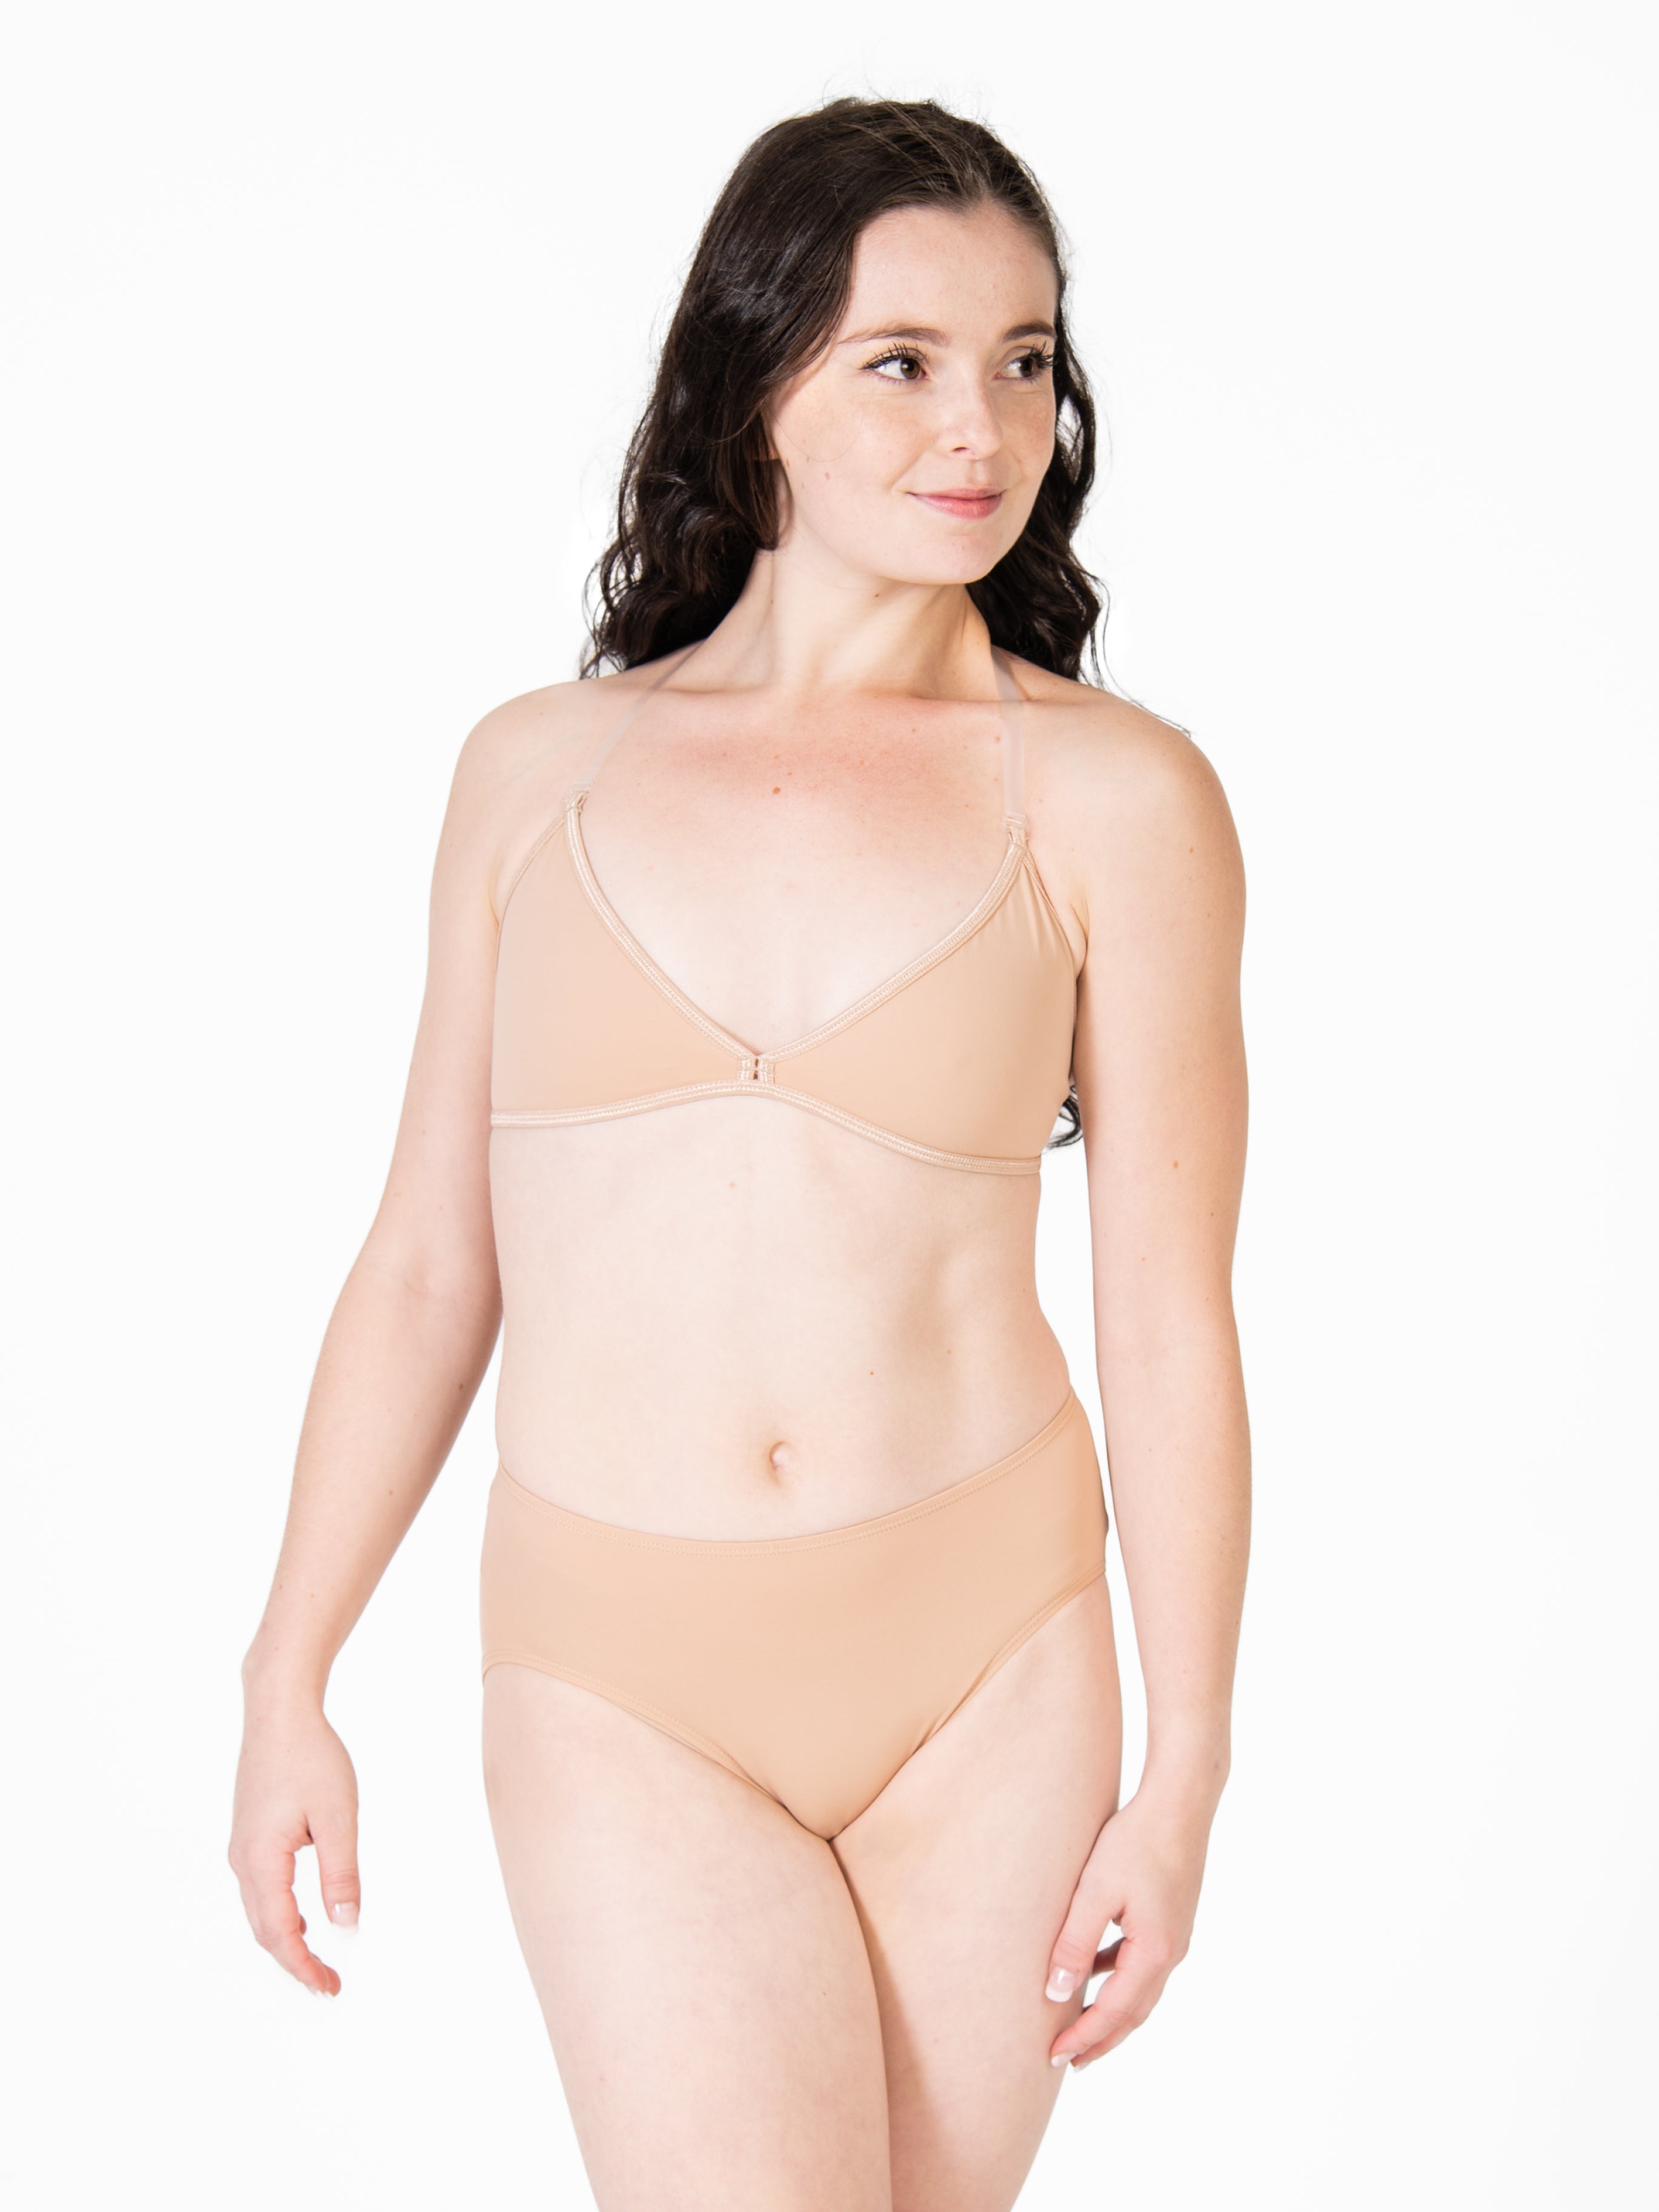 Padded bra nude leotard - To The Pointe-Shoe Store